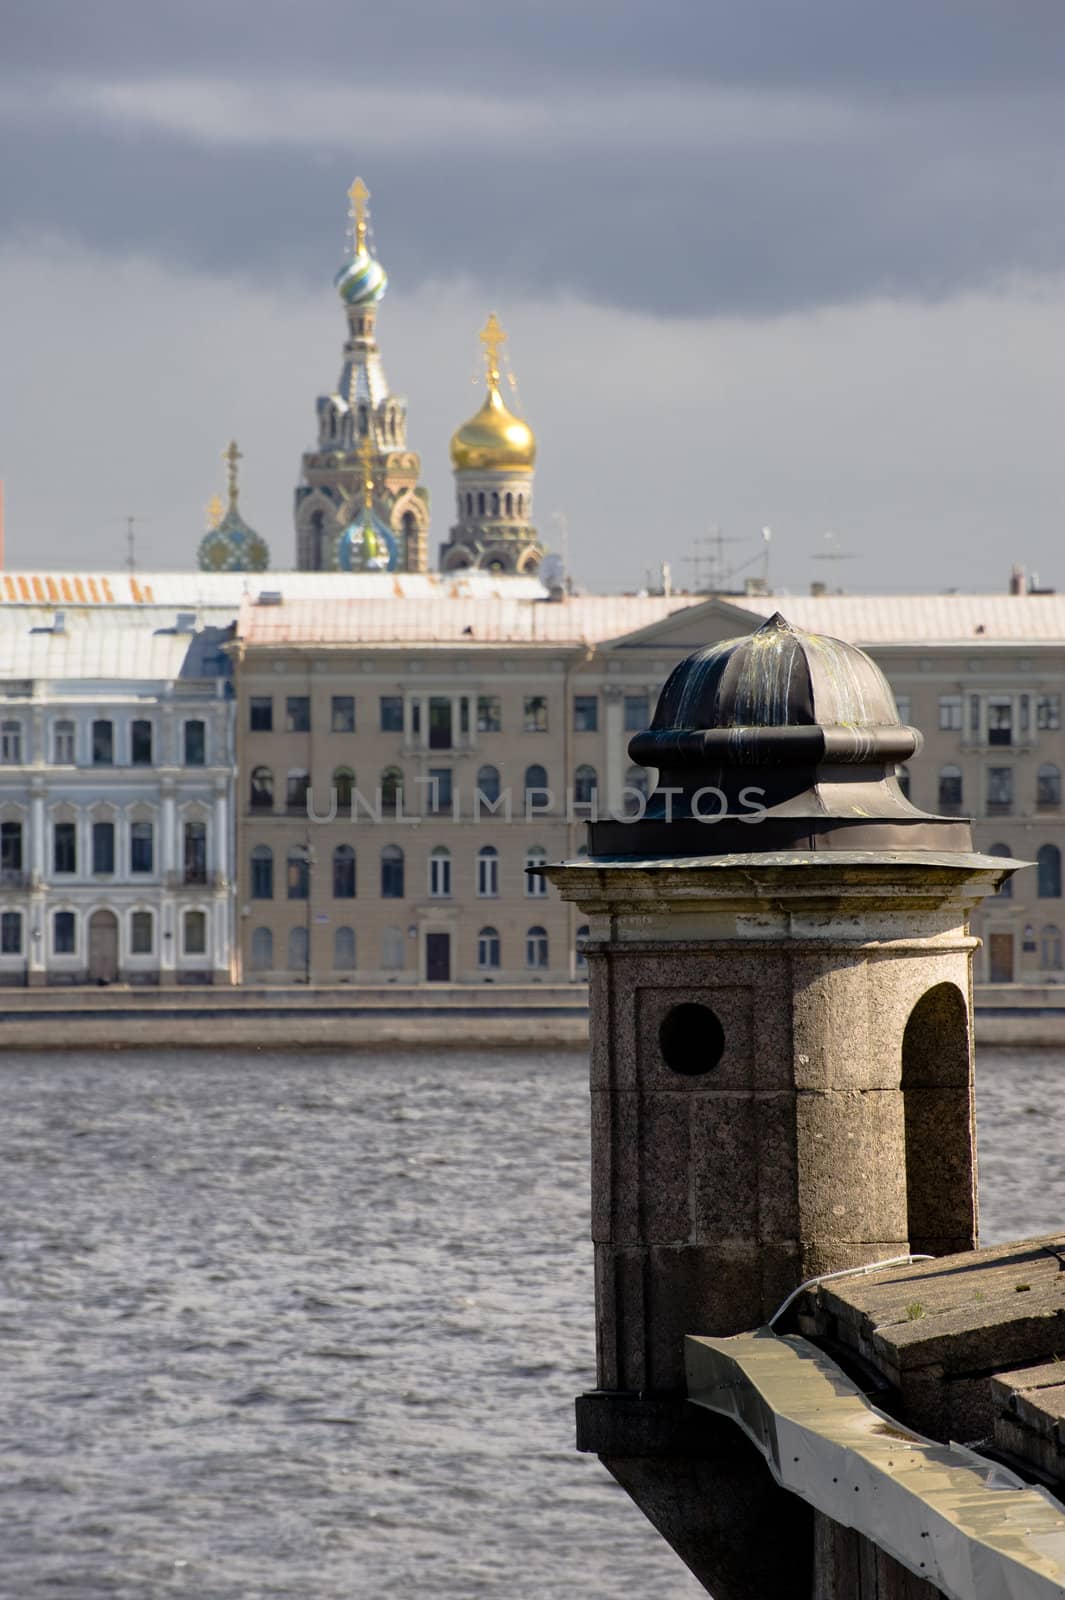 View on the Neva river in Sankt Petersburg, Russia